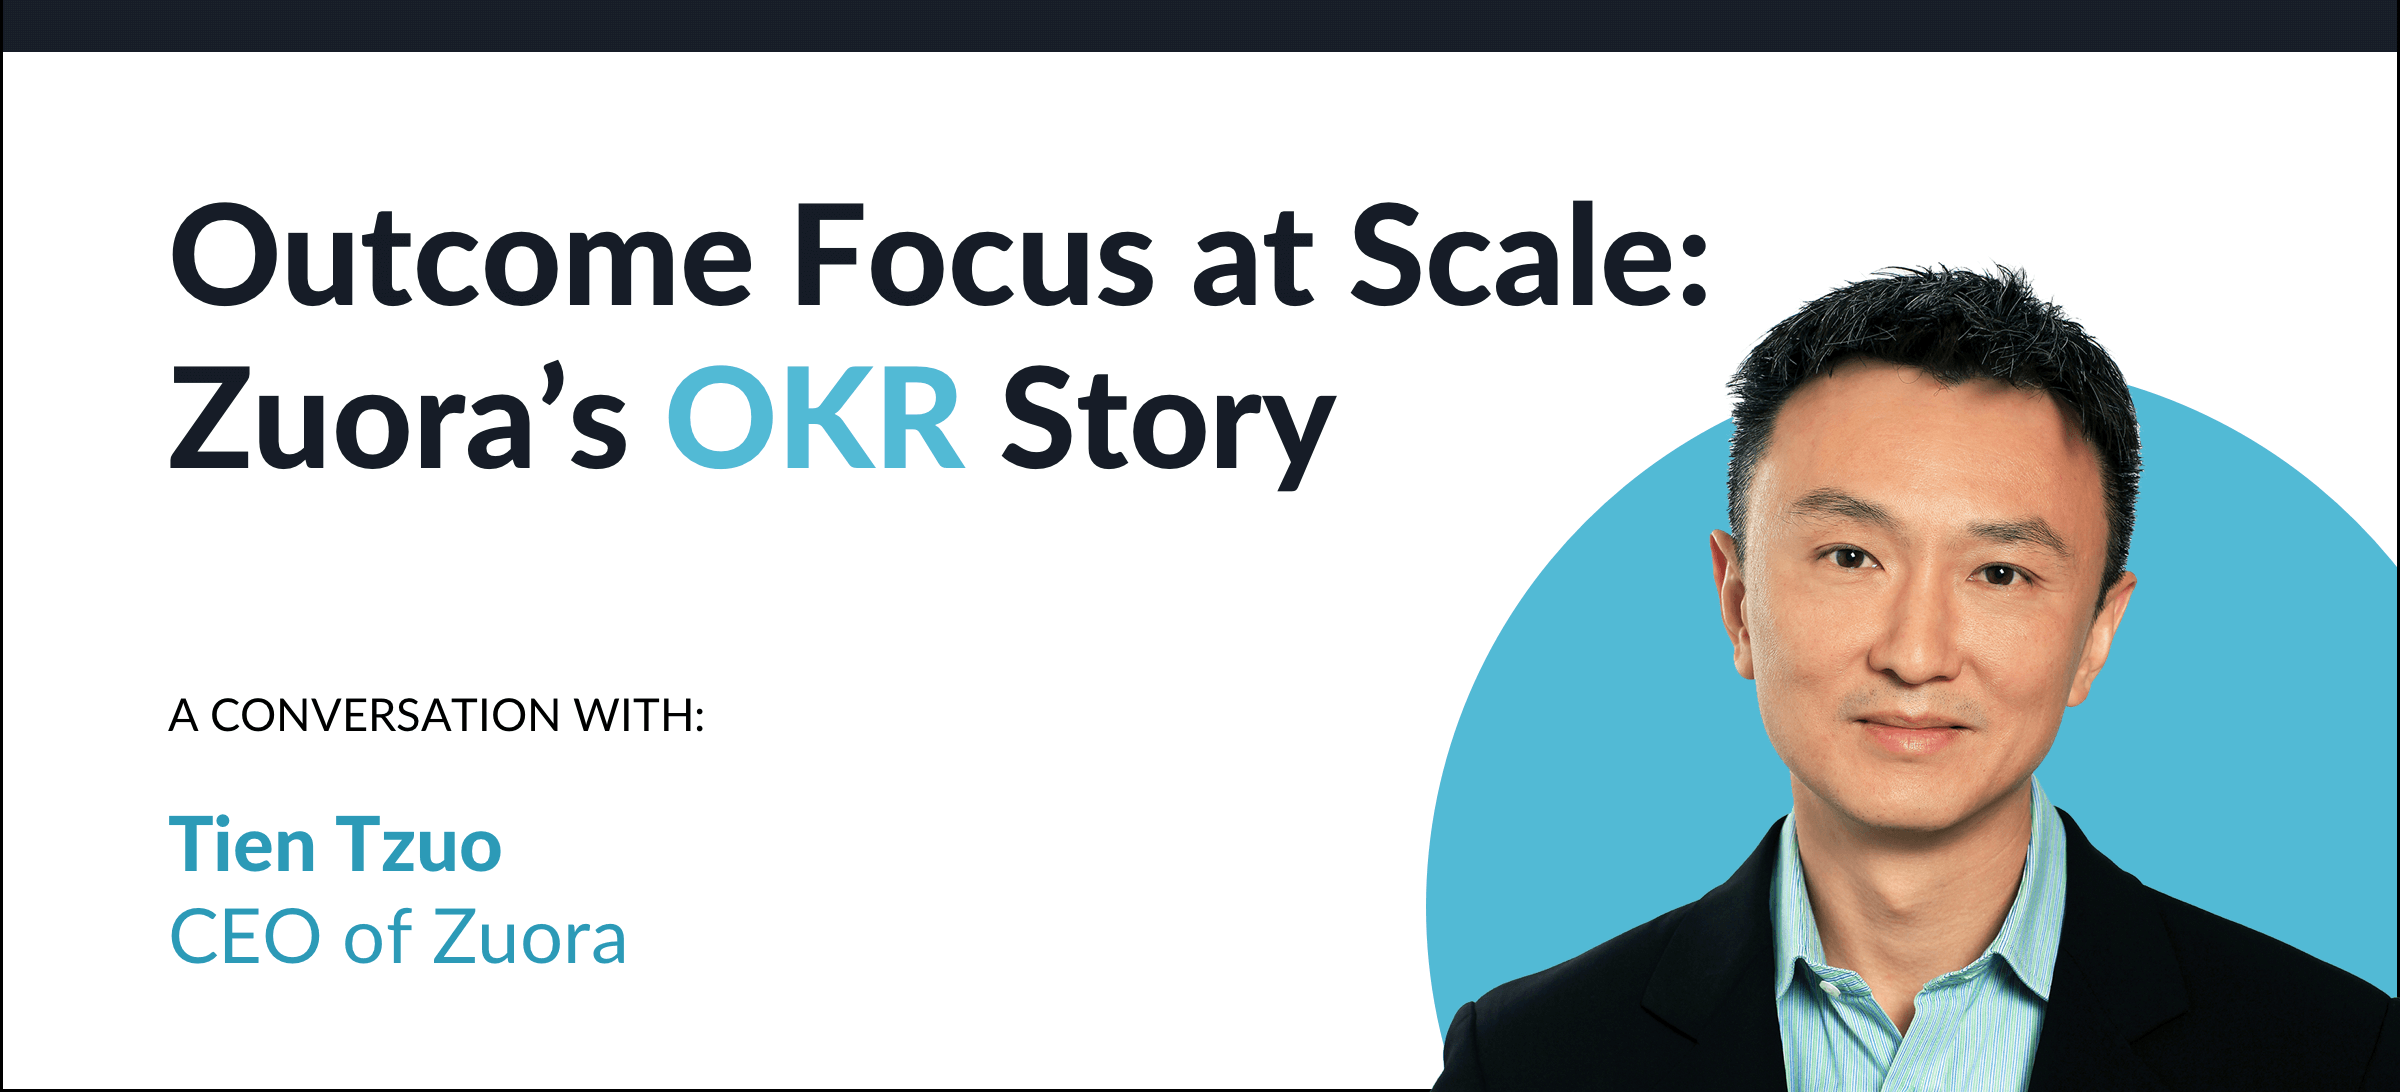 Outcome Focus at Scale: Zuora’s OKR Story